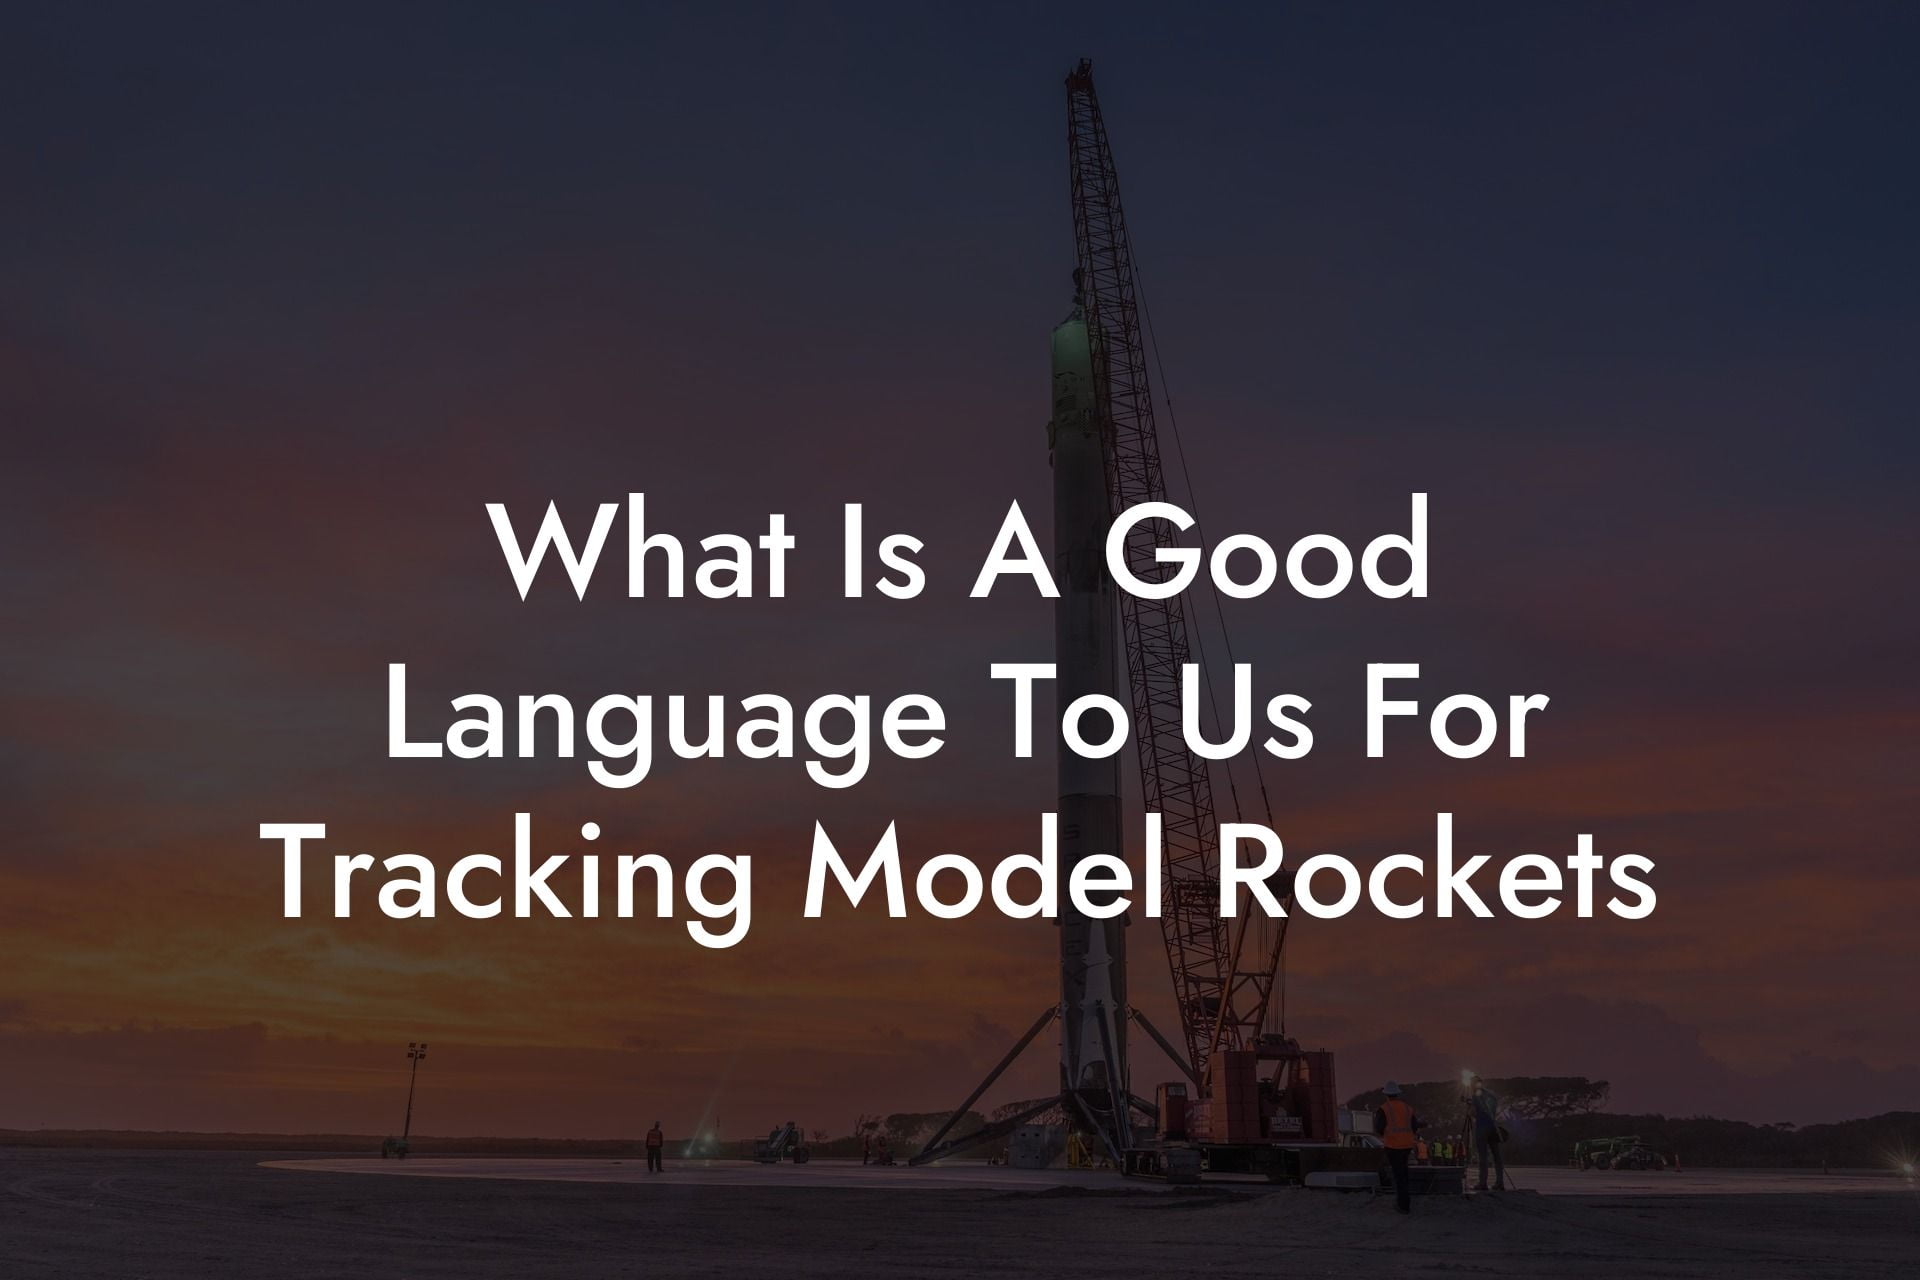 What Is A Good Language To Us For Tracking Model Rockets